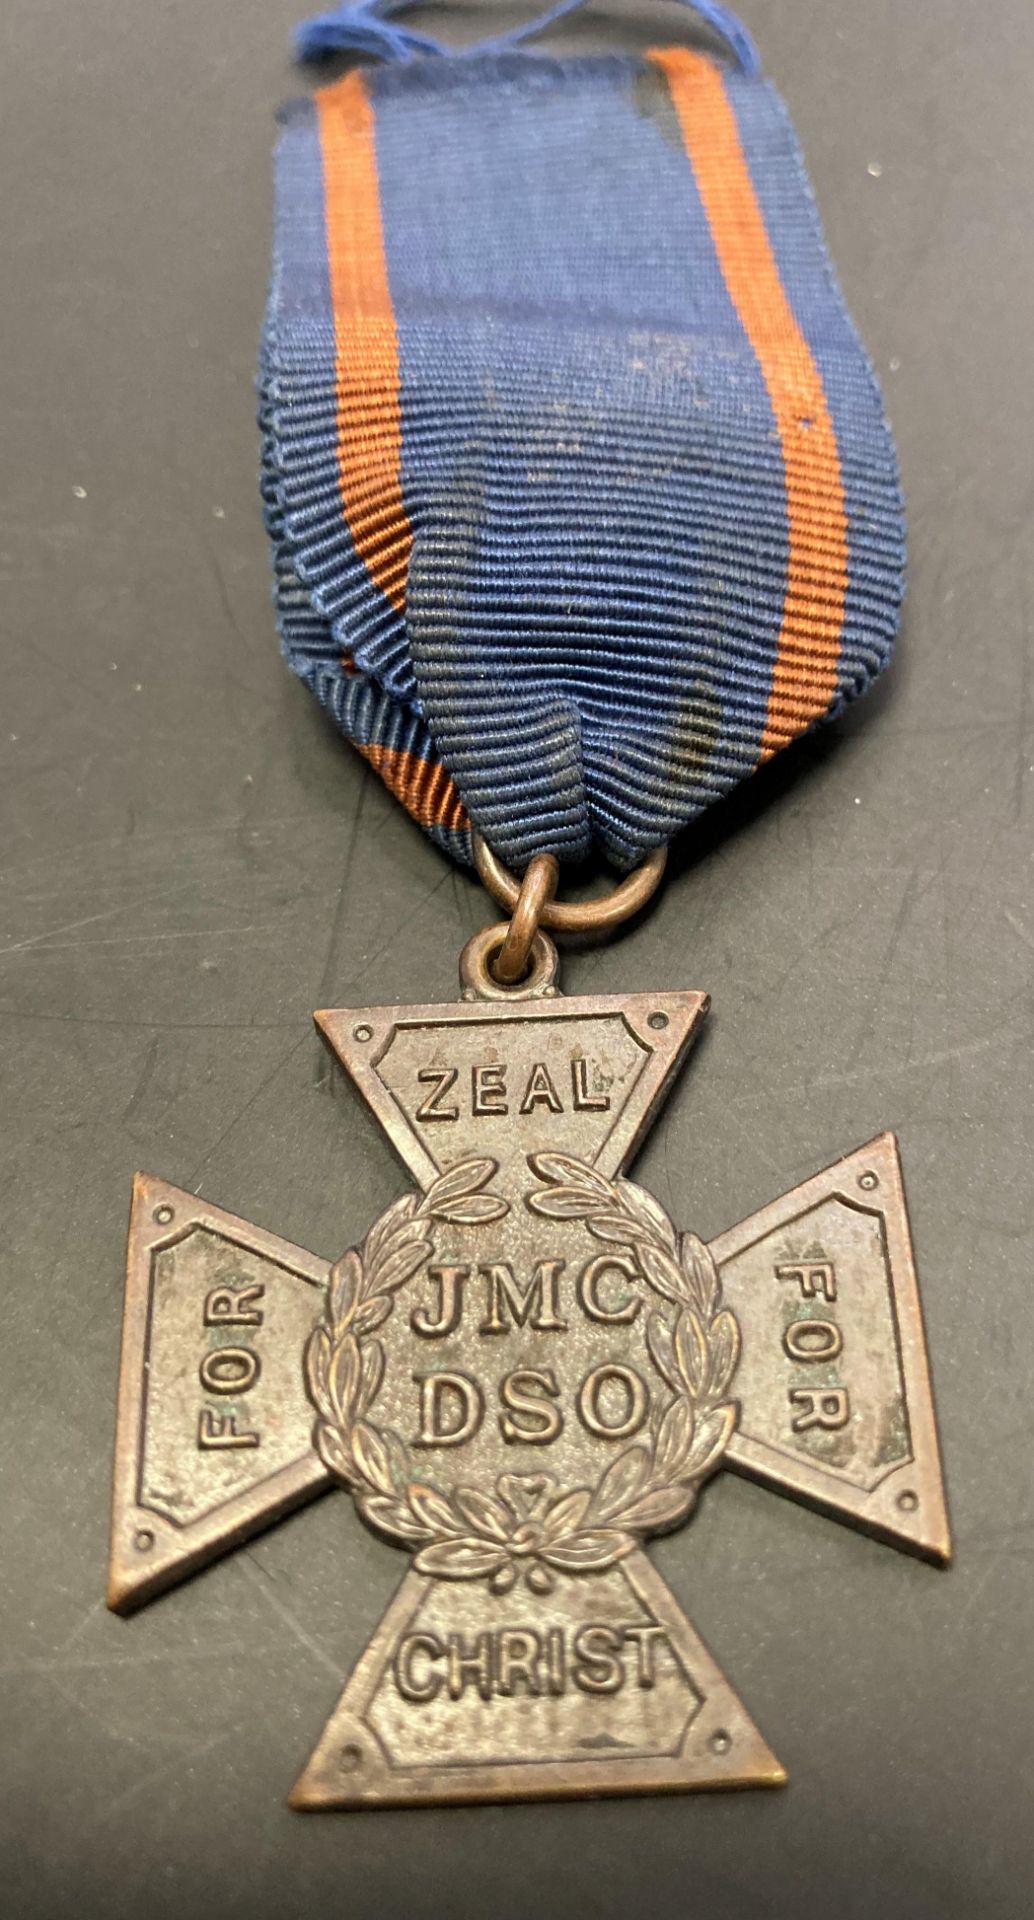 Six Second World War Medals - the 1939-1945 Star with ribbon, the Africa Star, two 1939-1945, - Image 6 of 8